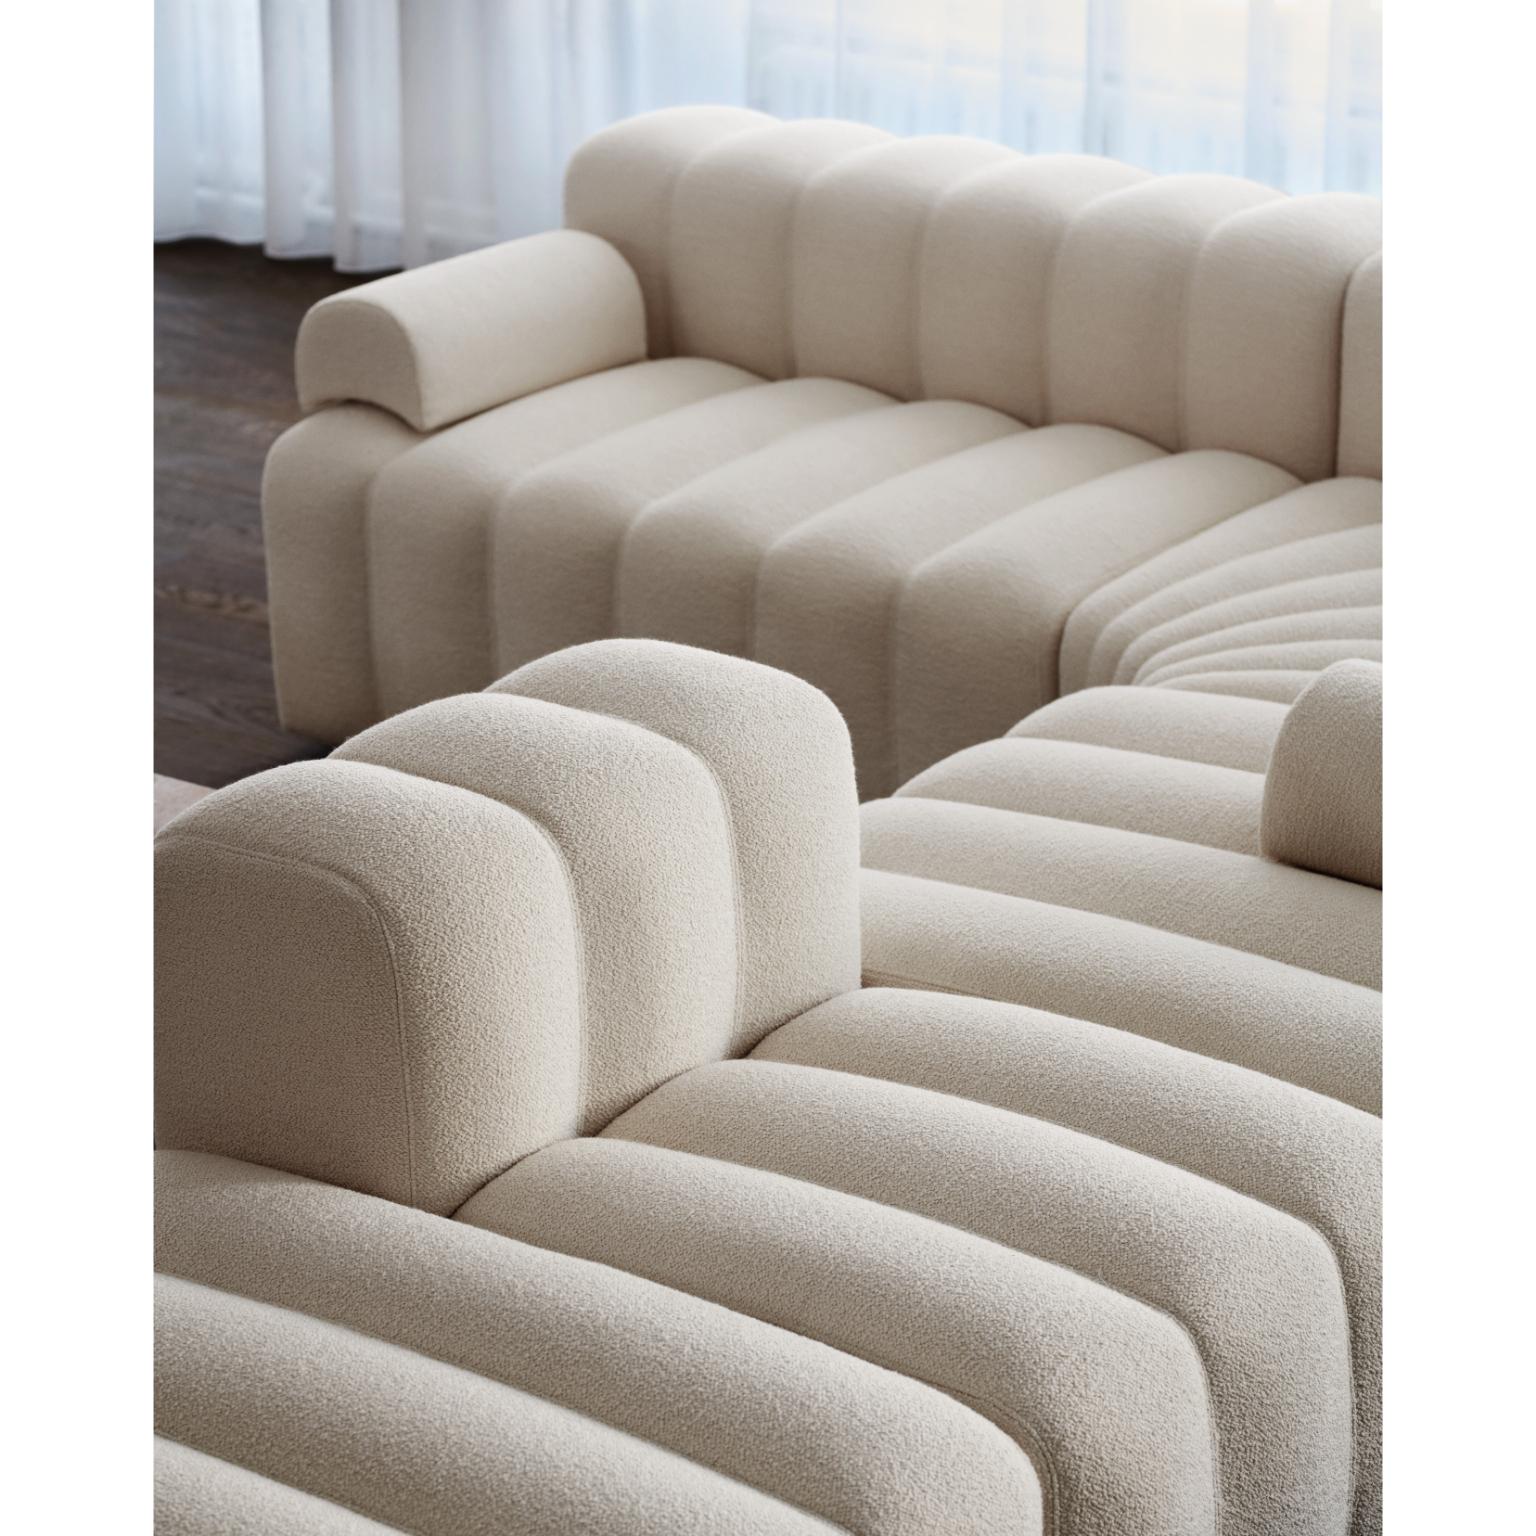 Studio Lounge Medium Modular Sofa by NORR11
Dimensions: D 130 x W 80 x H 70 cm. SH 47 cm. 
Materials: Foam, wood and upholstery.
Upholstery: Barnum Boucle Color 3.

Available in different upholstery options. A plywood structure with elastic belts &